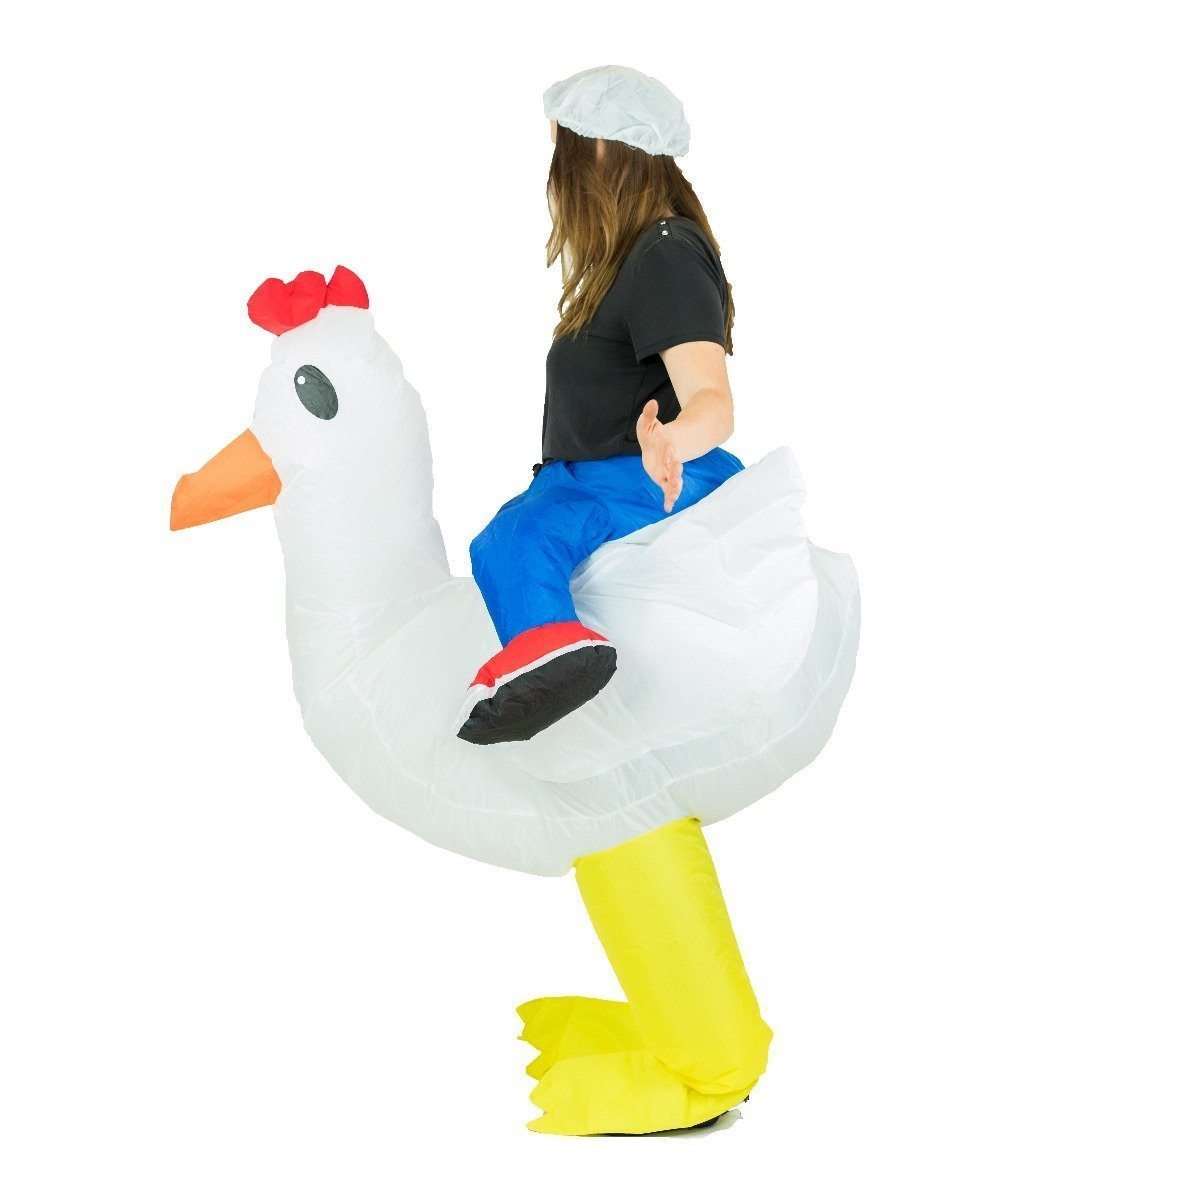 Fancy Dress - Inflatable Chicken Costume